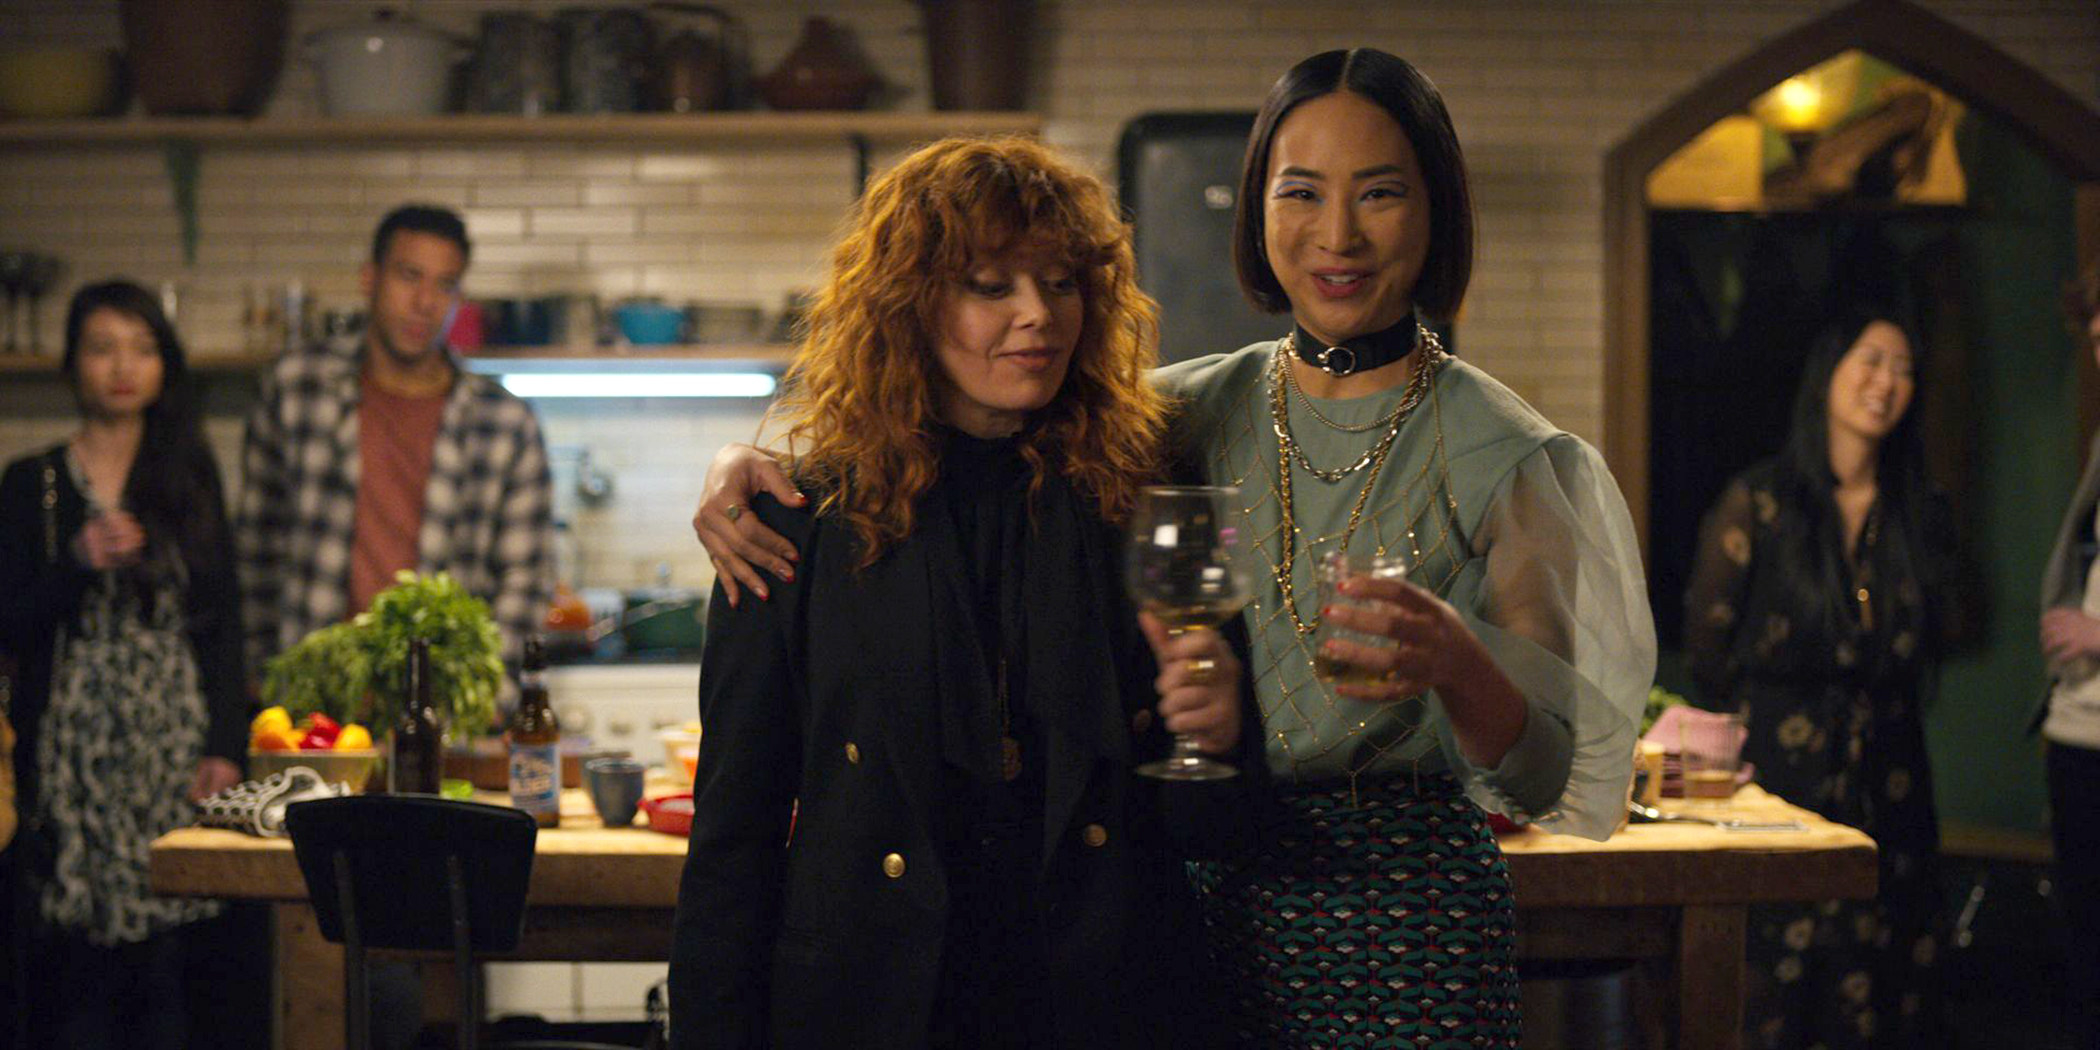 the characters of Russian Doll at a party with wine glasses in hand